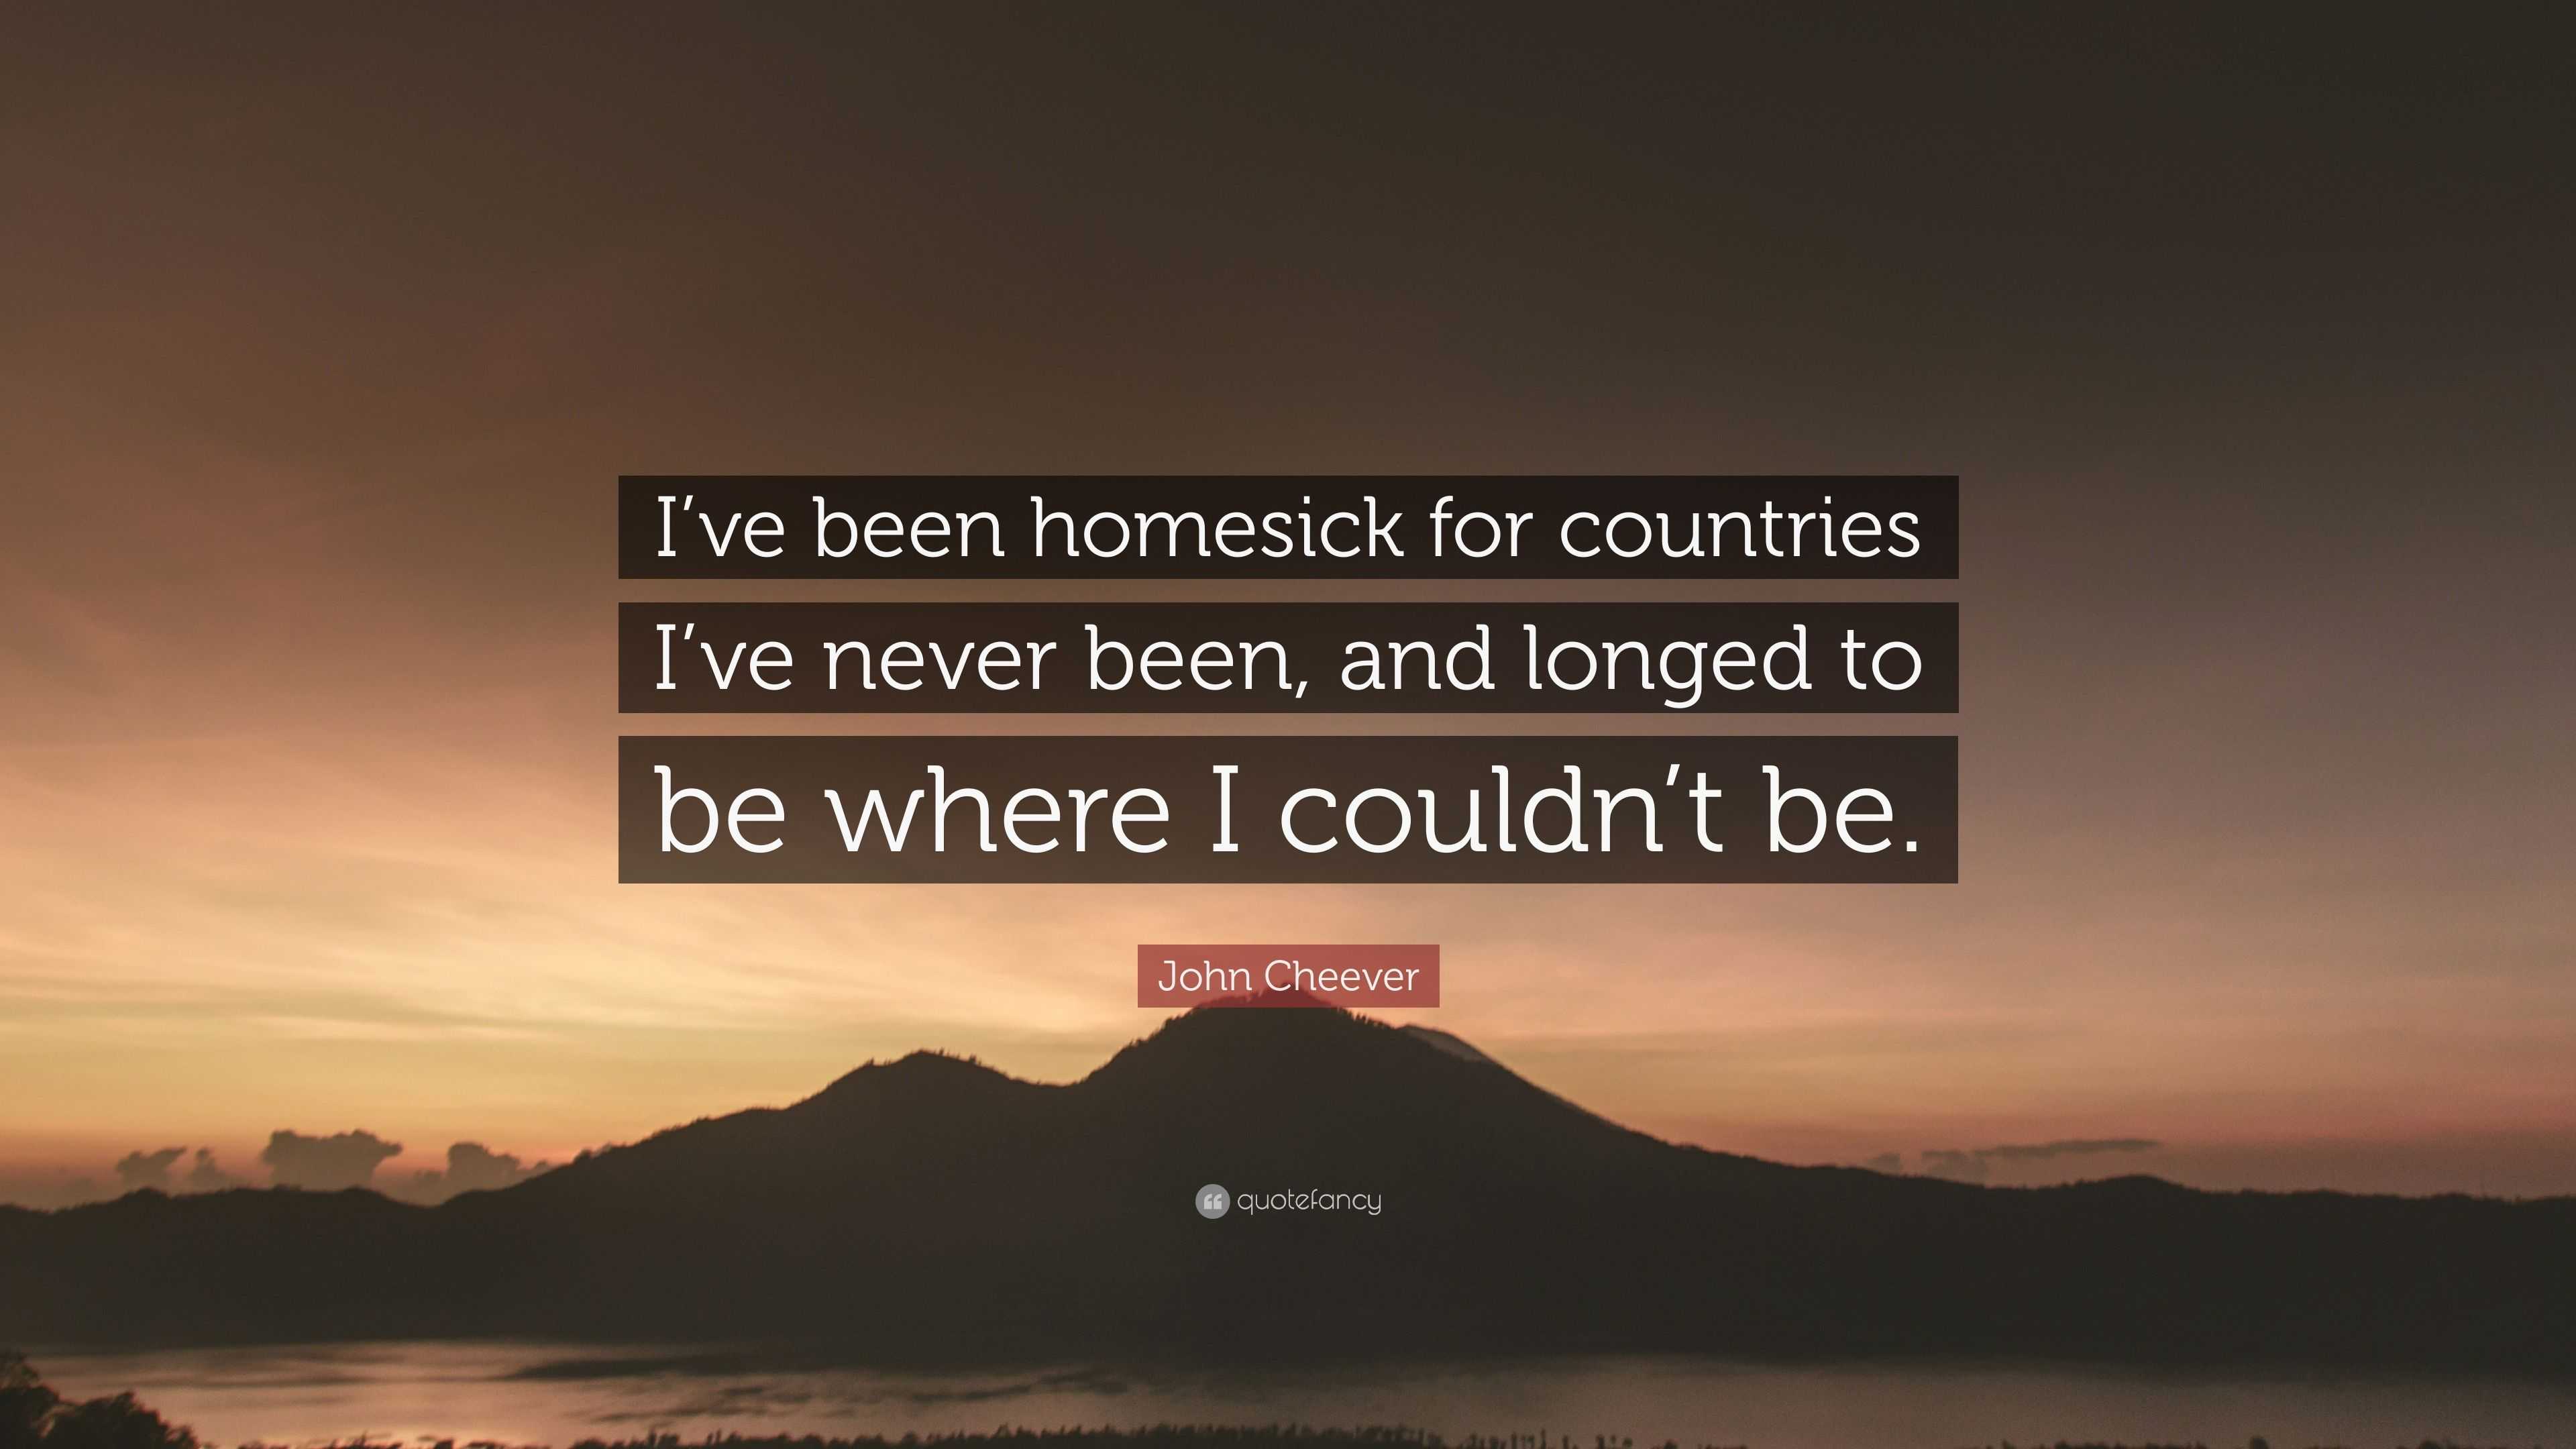 John Cheever Quote: “I’ve been homesick for countries I’ve never been ...